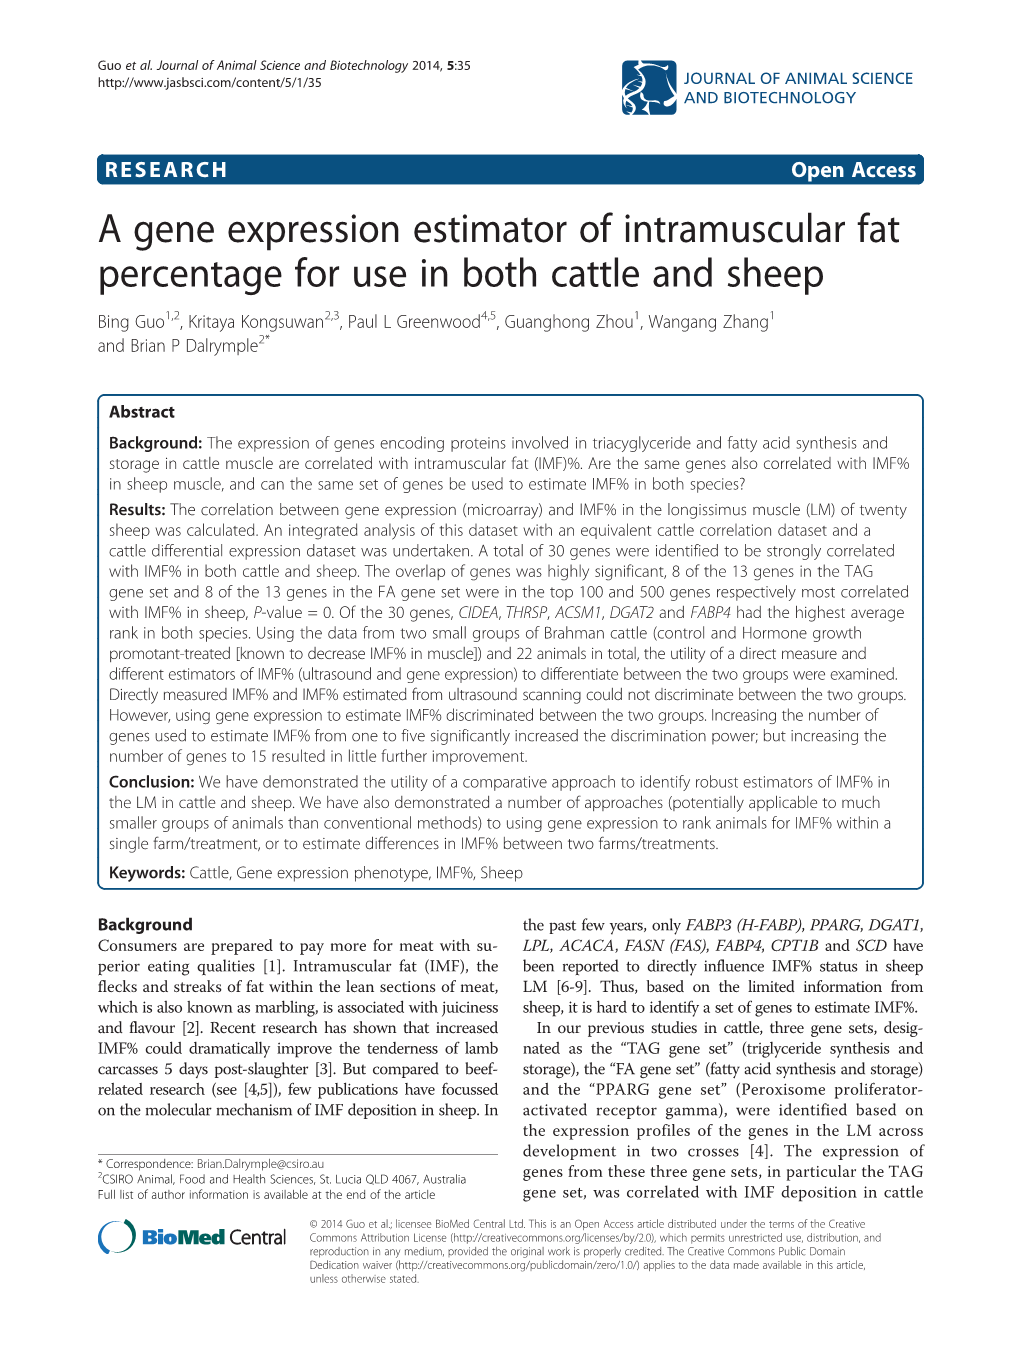 A Gene Expression Estimator of Intramuscular Fat Percentage for Use in Both Cattle and Sheep